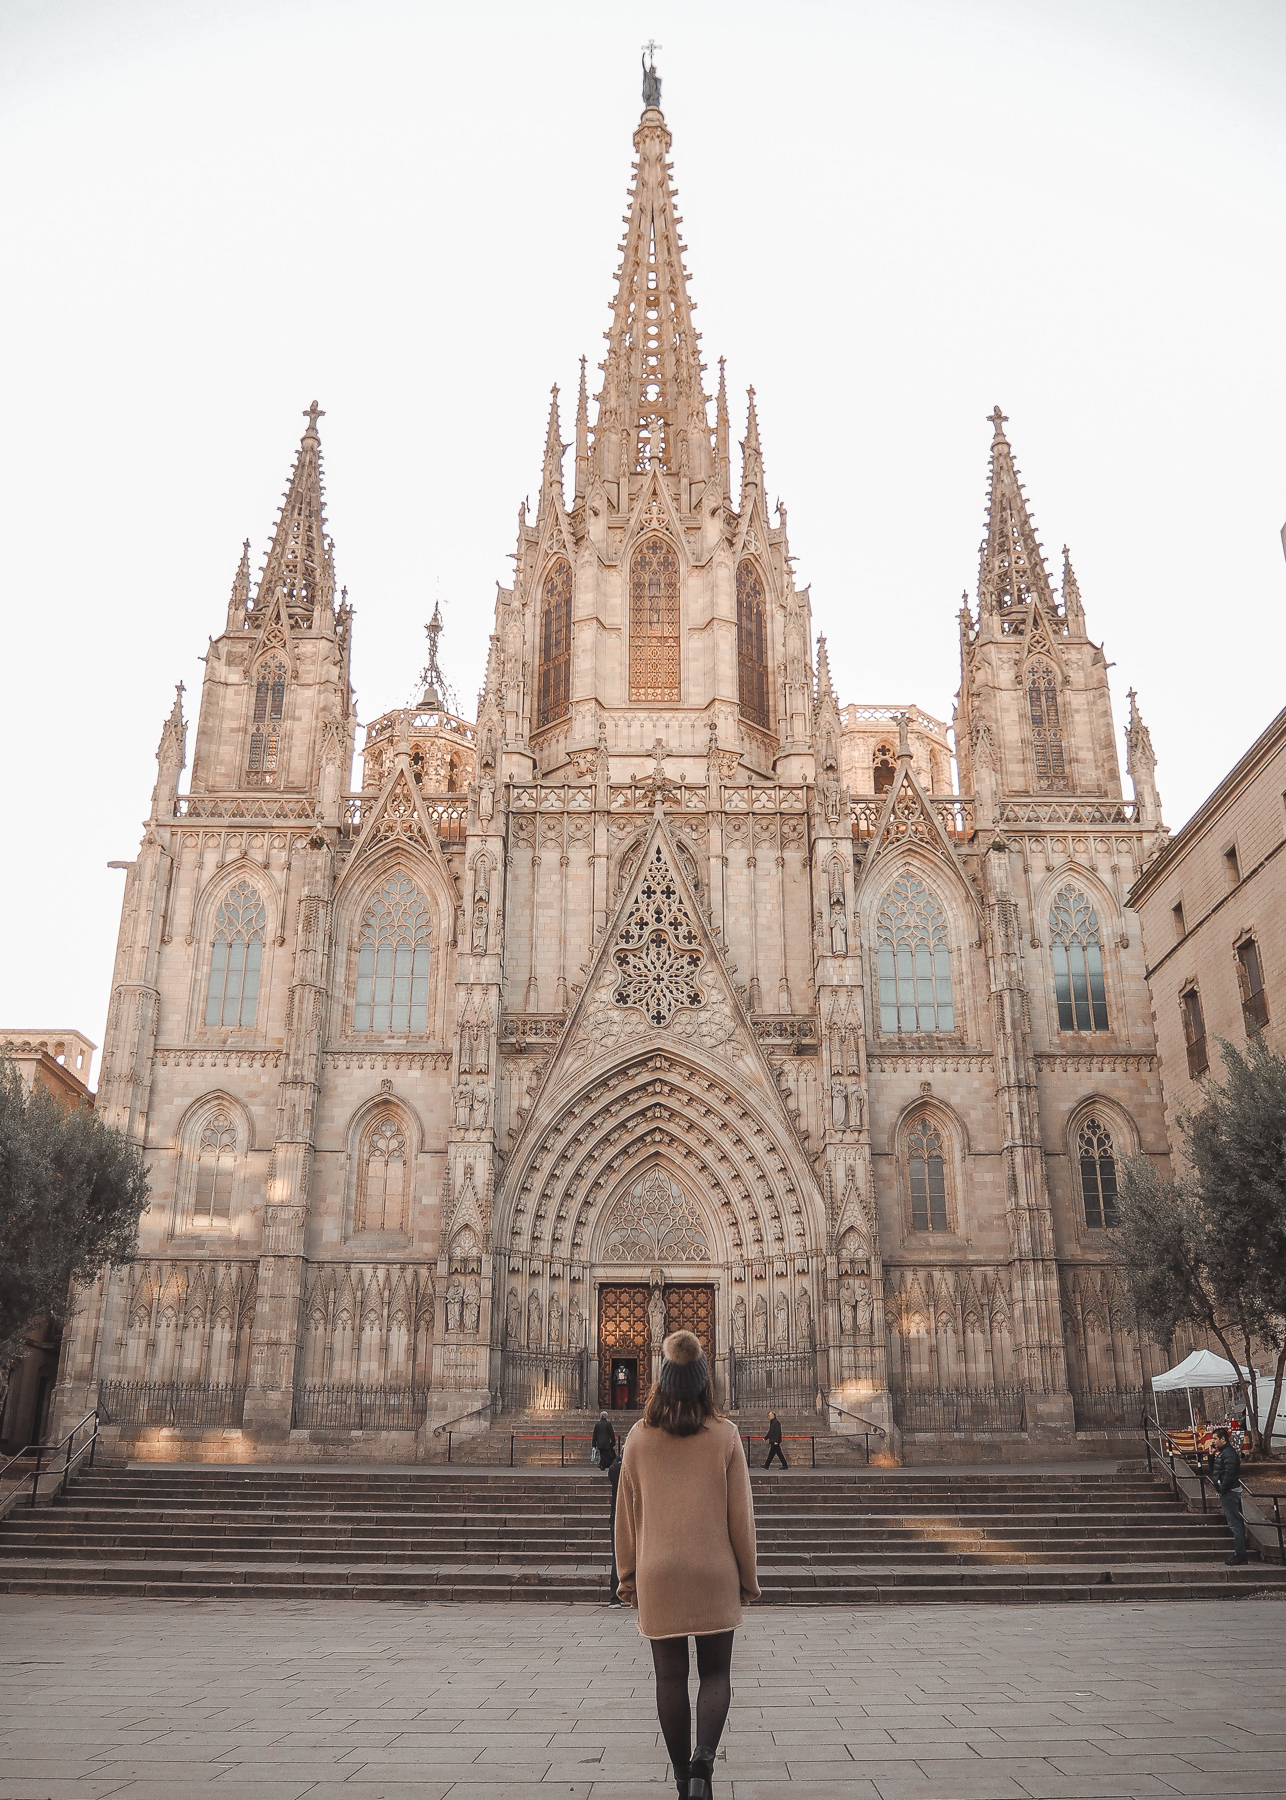 An Instagrammable Guide To Barcelona's Gothic Quarter | lifestyletraveler.co | IG: @lifestyletraveler.co